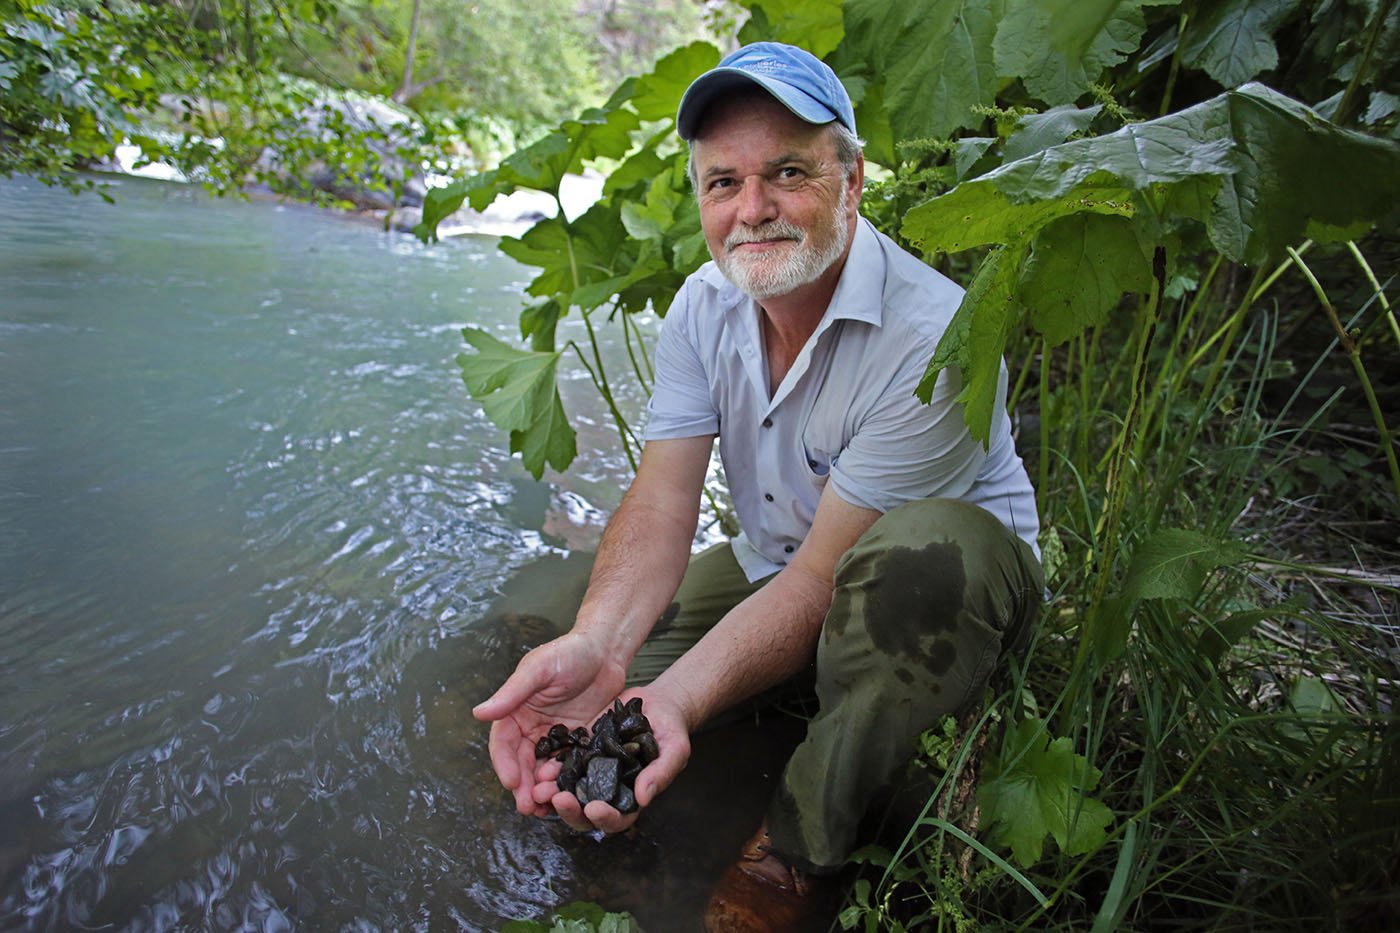  AH-DI-NA Campground, CA — Jonathan Ambrose, scientist with the National Oceanic and Atmospheric Administration, shows off gravel from the McCloud River. In 2010, NOAA began planning a pilot salmon restoration program. July 12, 2022. Tom Levy/The Spi